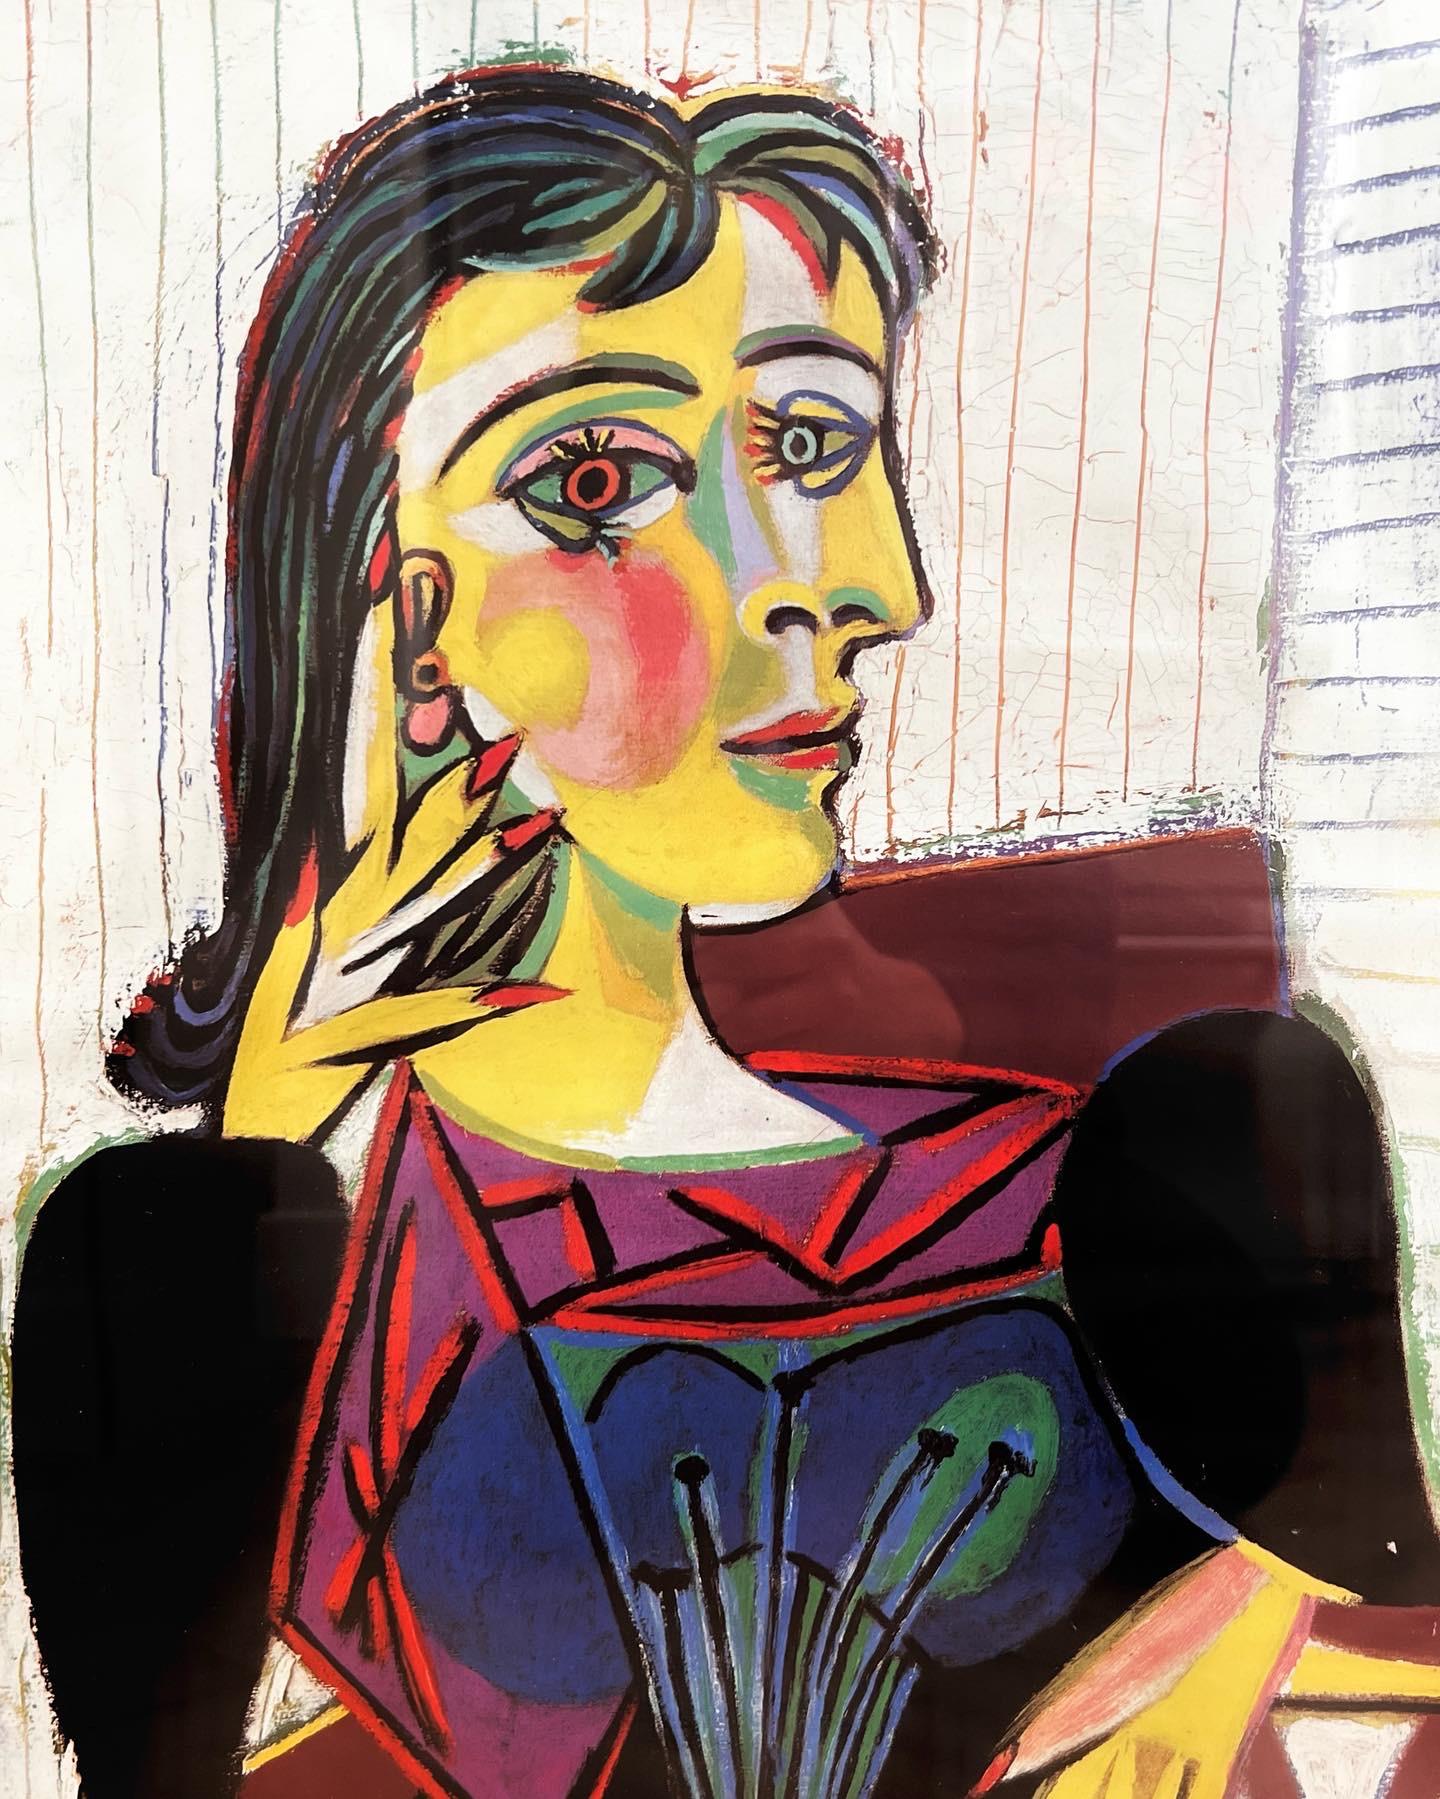 A vintage Picasso exhibition poster from the Musée Picasso featuring a detail from his 1937 portrait of Dora Maar, 20th century. Framed in copper-toned titanium, behind glass, and in fabulous condition. Pick up in central West Los Angeles or